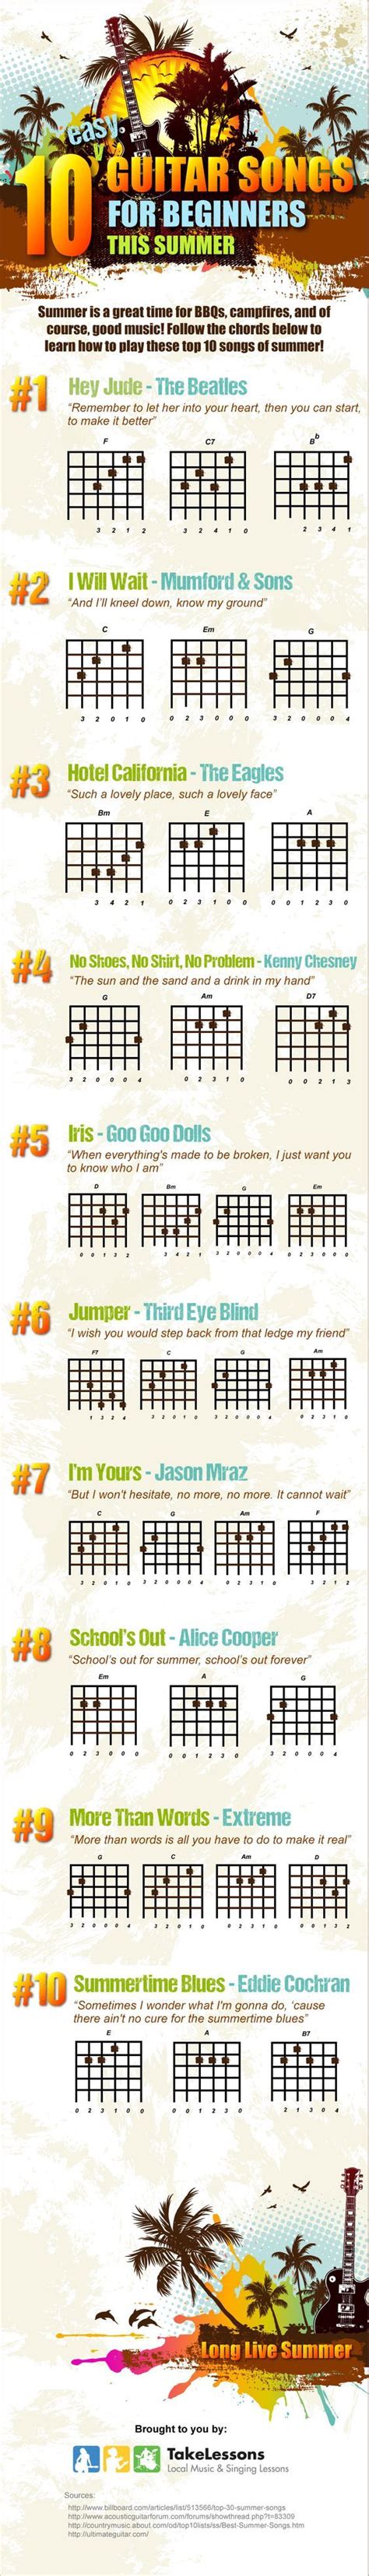 If you have picked up the guitar recently and are looking for some nice tunes to play, you've that being said, the acoustic guitar is definitely one of the most rewarding instruments to learn and play. 20 best GUITAR CHORDS images on Pinterest | Easy guitar chords, Guitar lessons and Sheet music